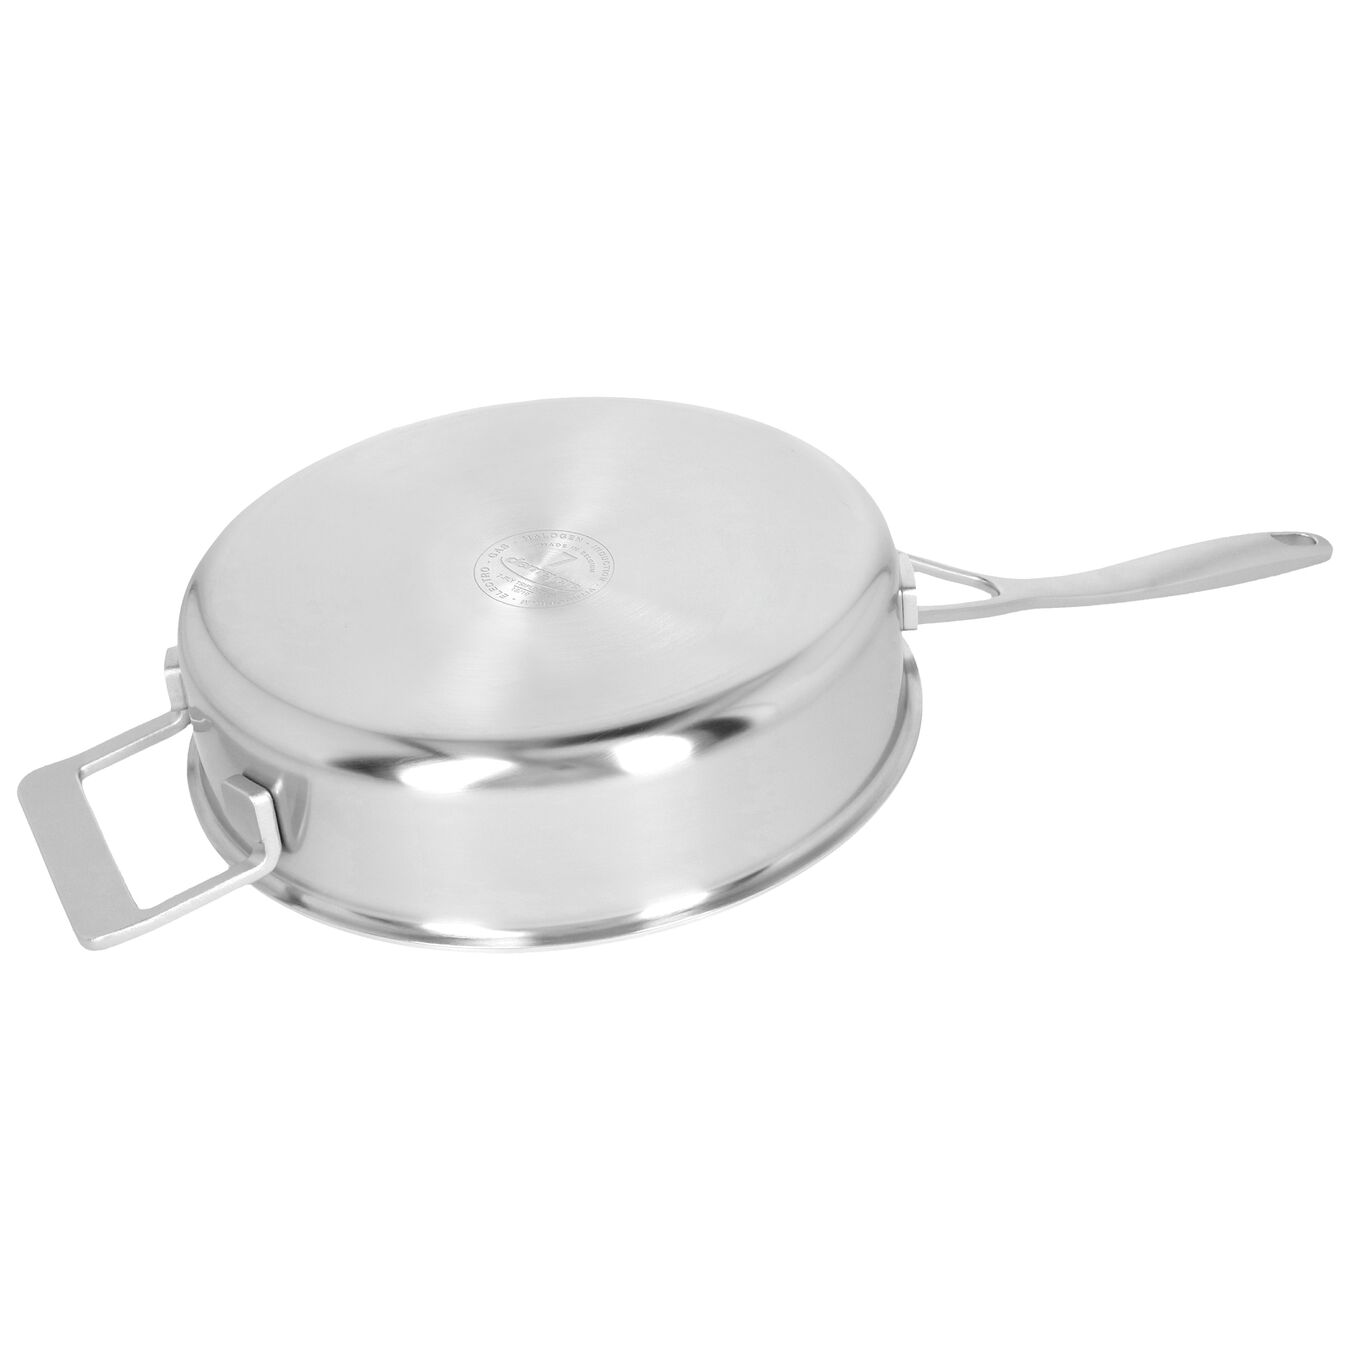 3 qt Sauté Pan with Helper Handle and Lid, 18/10 Stainless Steel ,,large 4